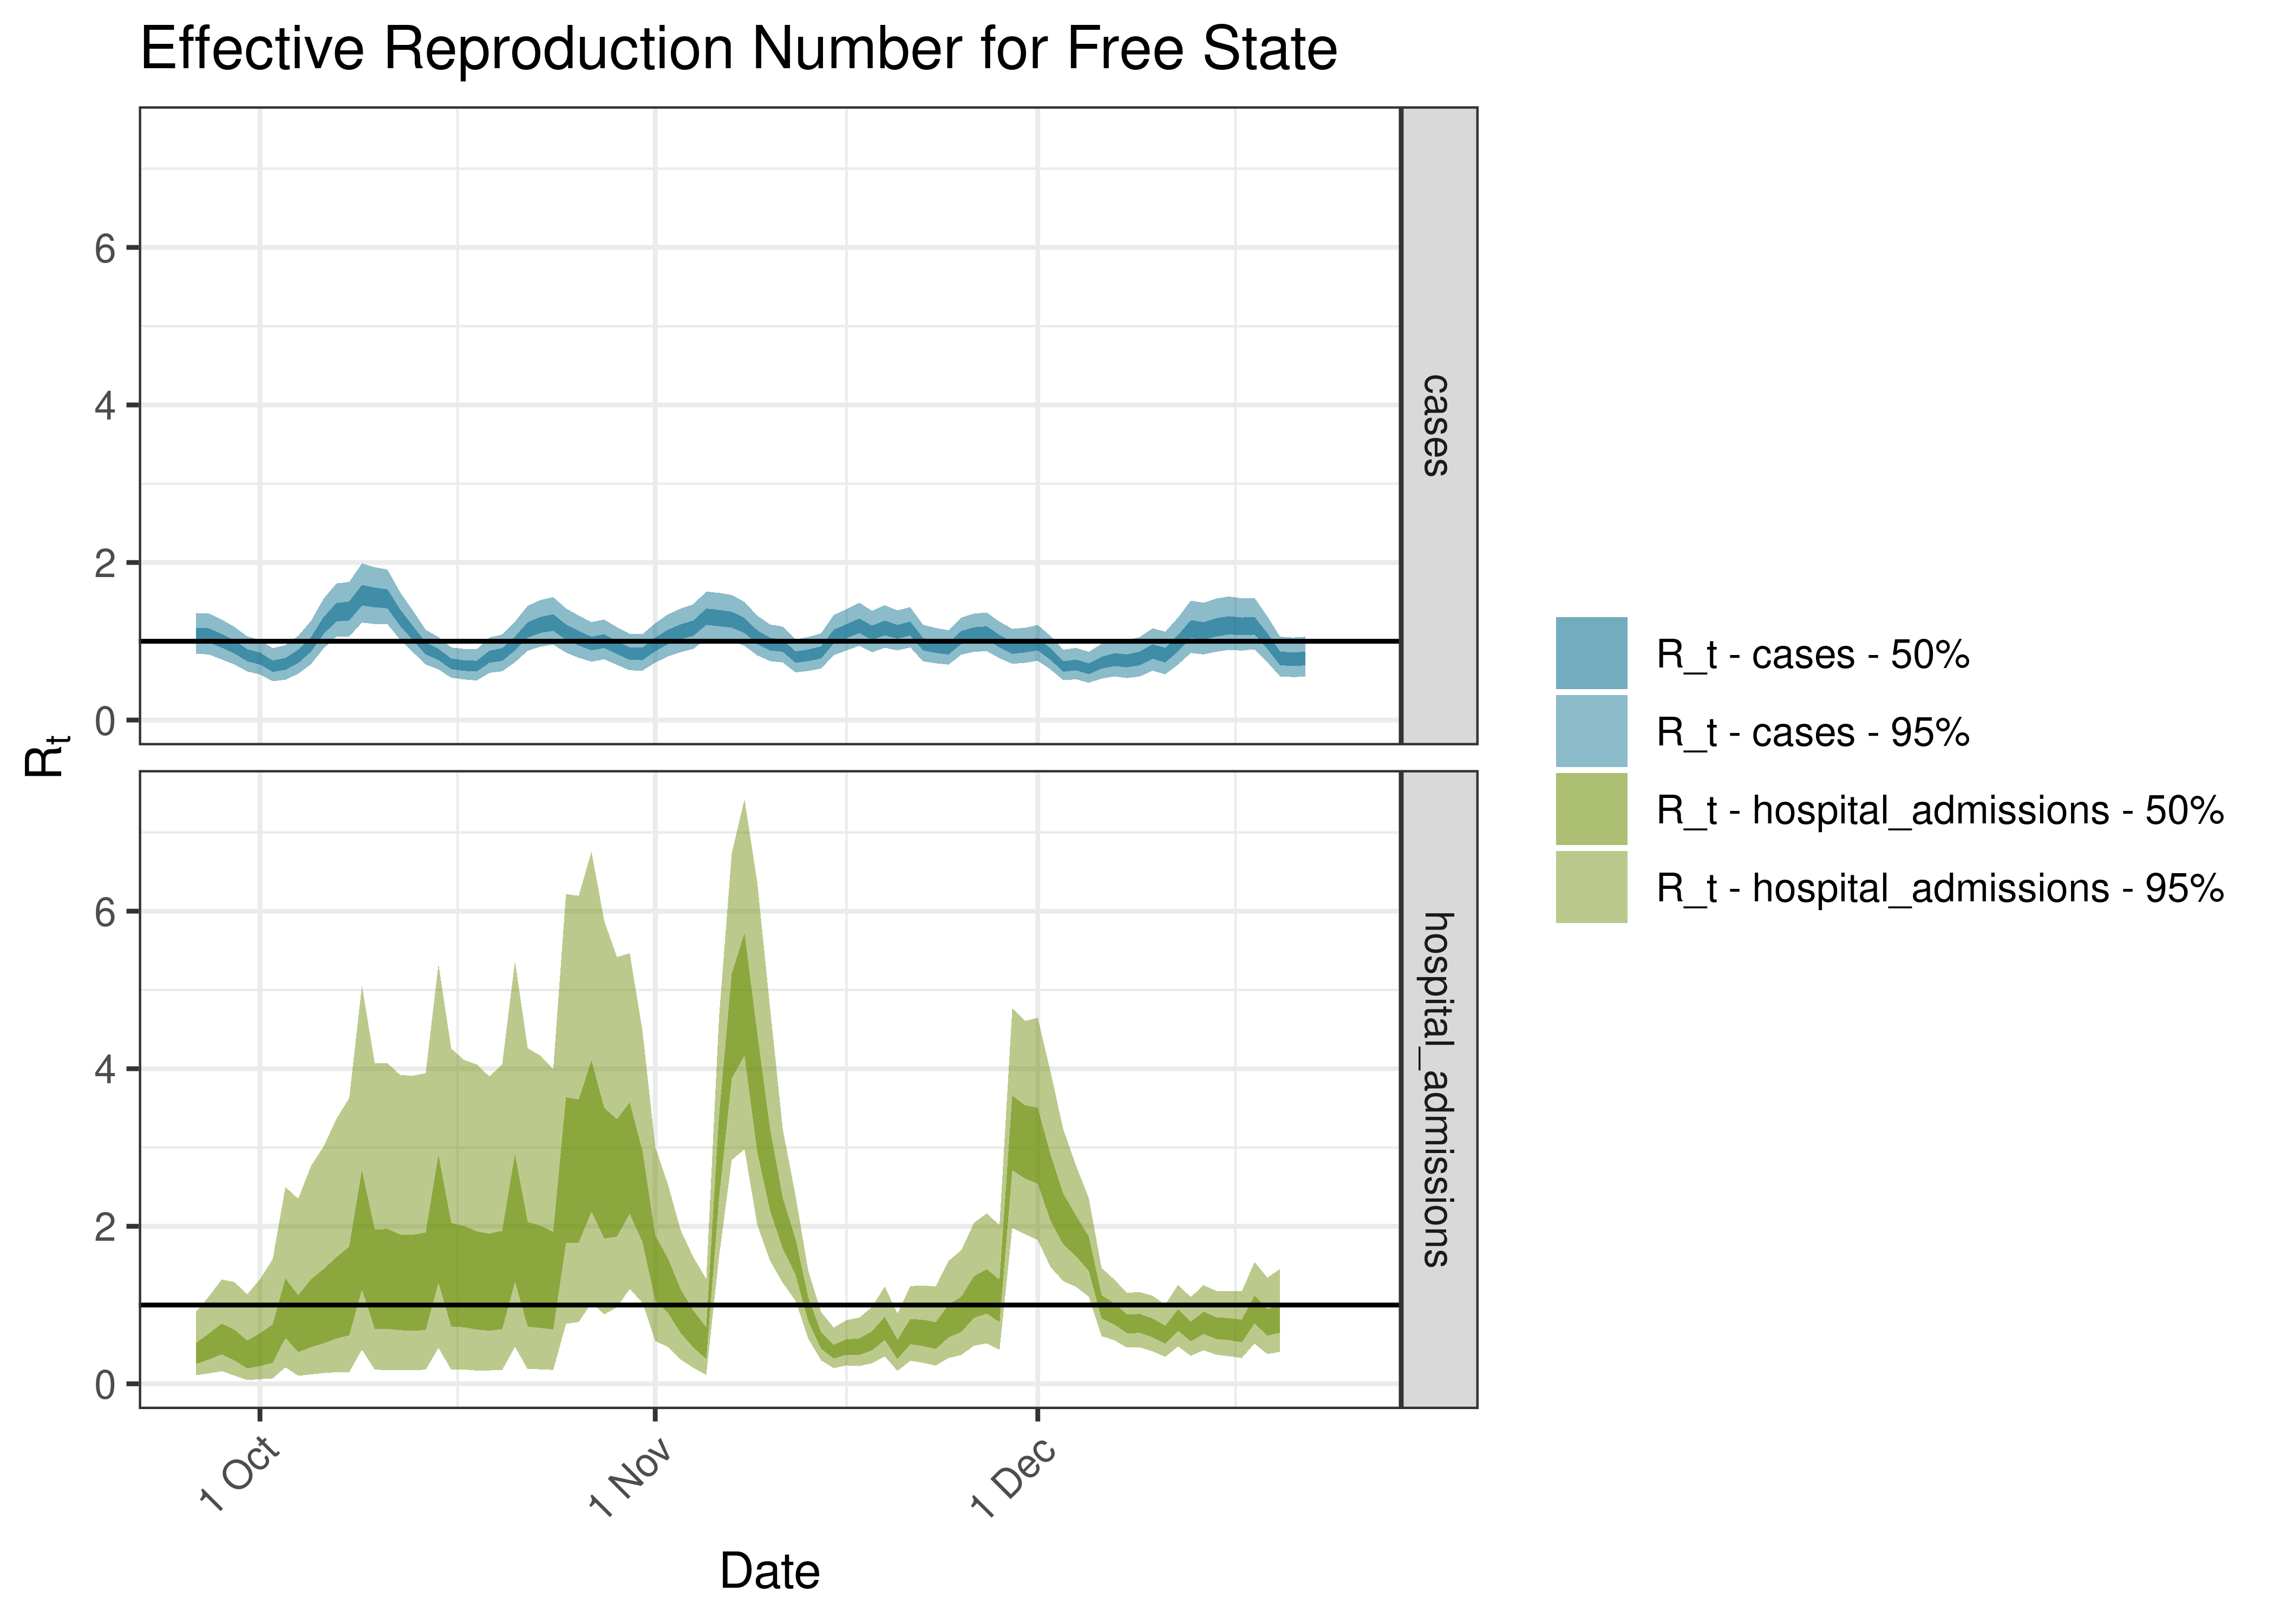 Estimated Effective Reproduction Number for Free State over last 90 days